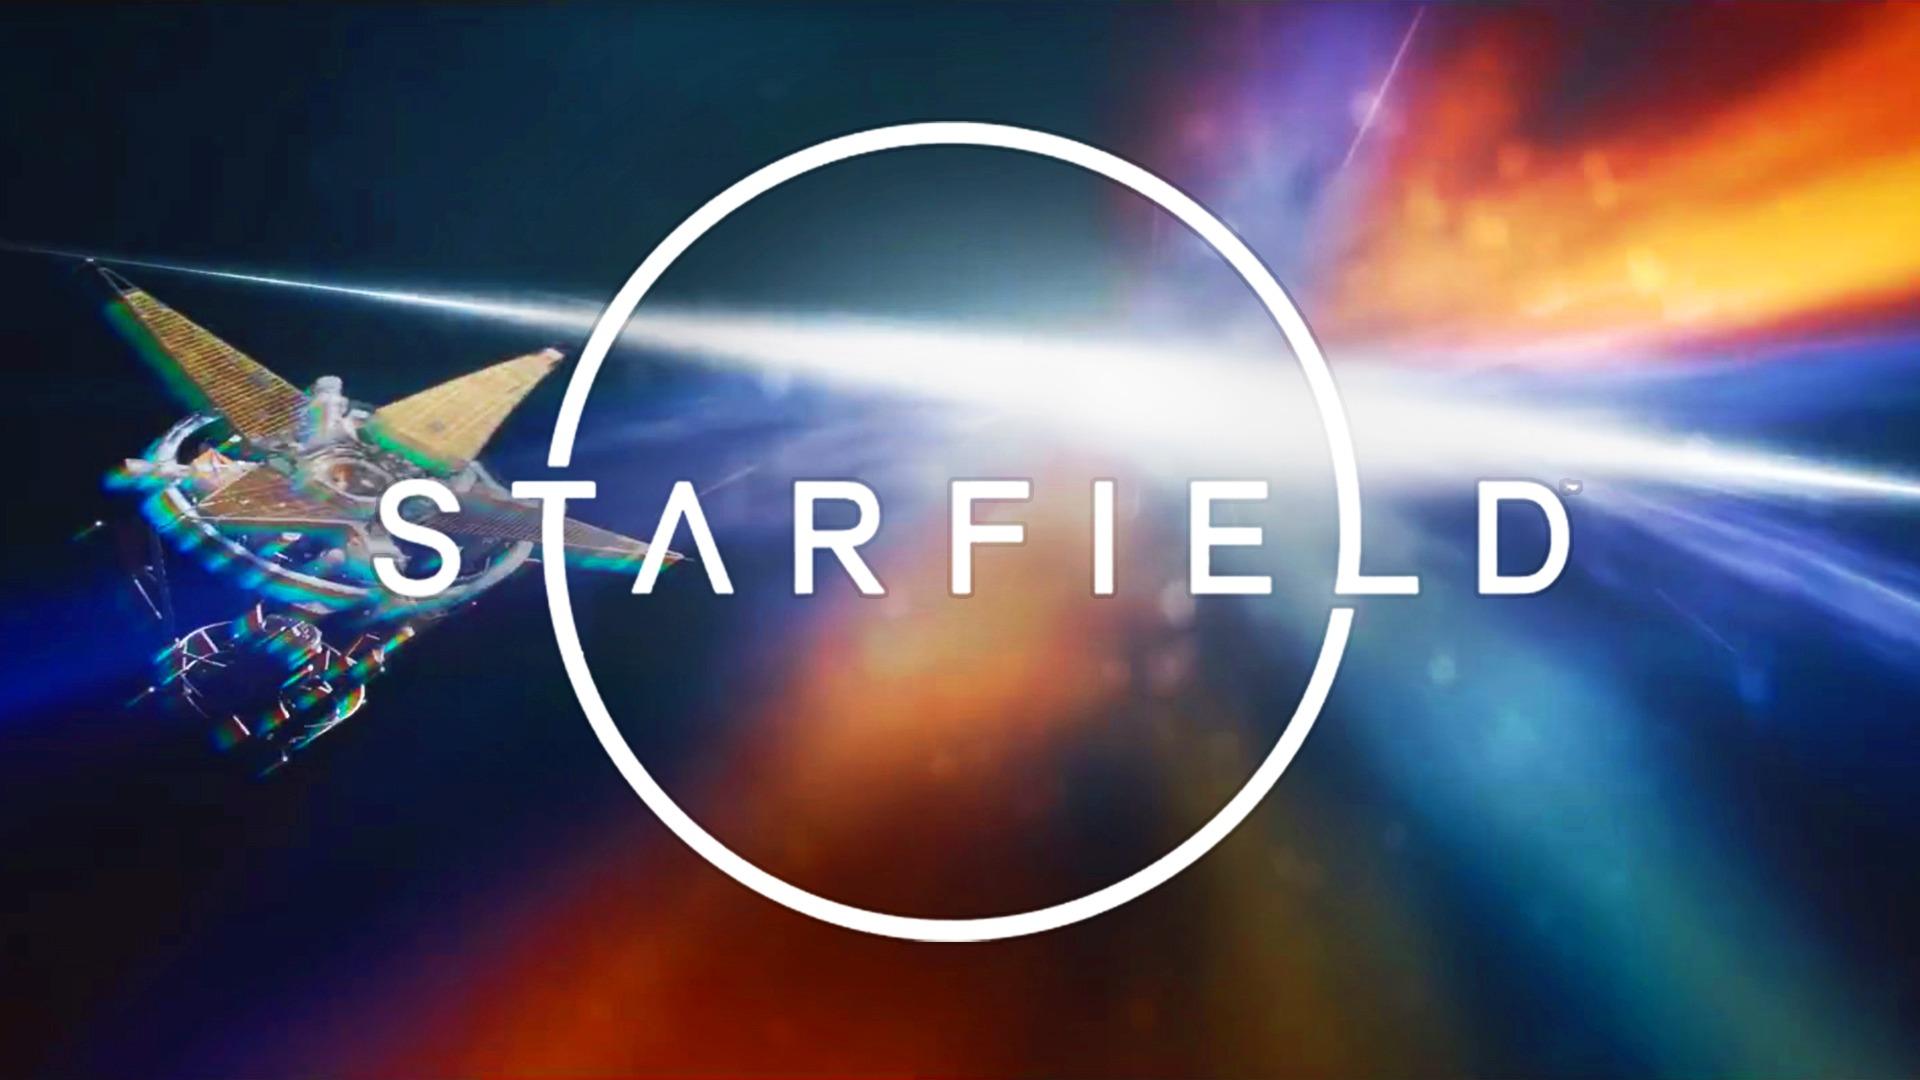 Phil Spencer Claims Starfield to Take Inspiration from Oblivion, Promises a Unique Gaming Experience